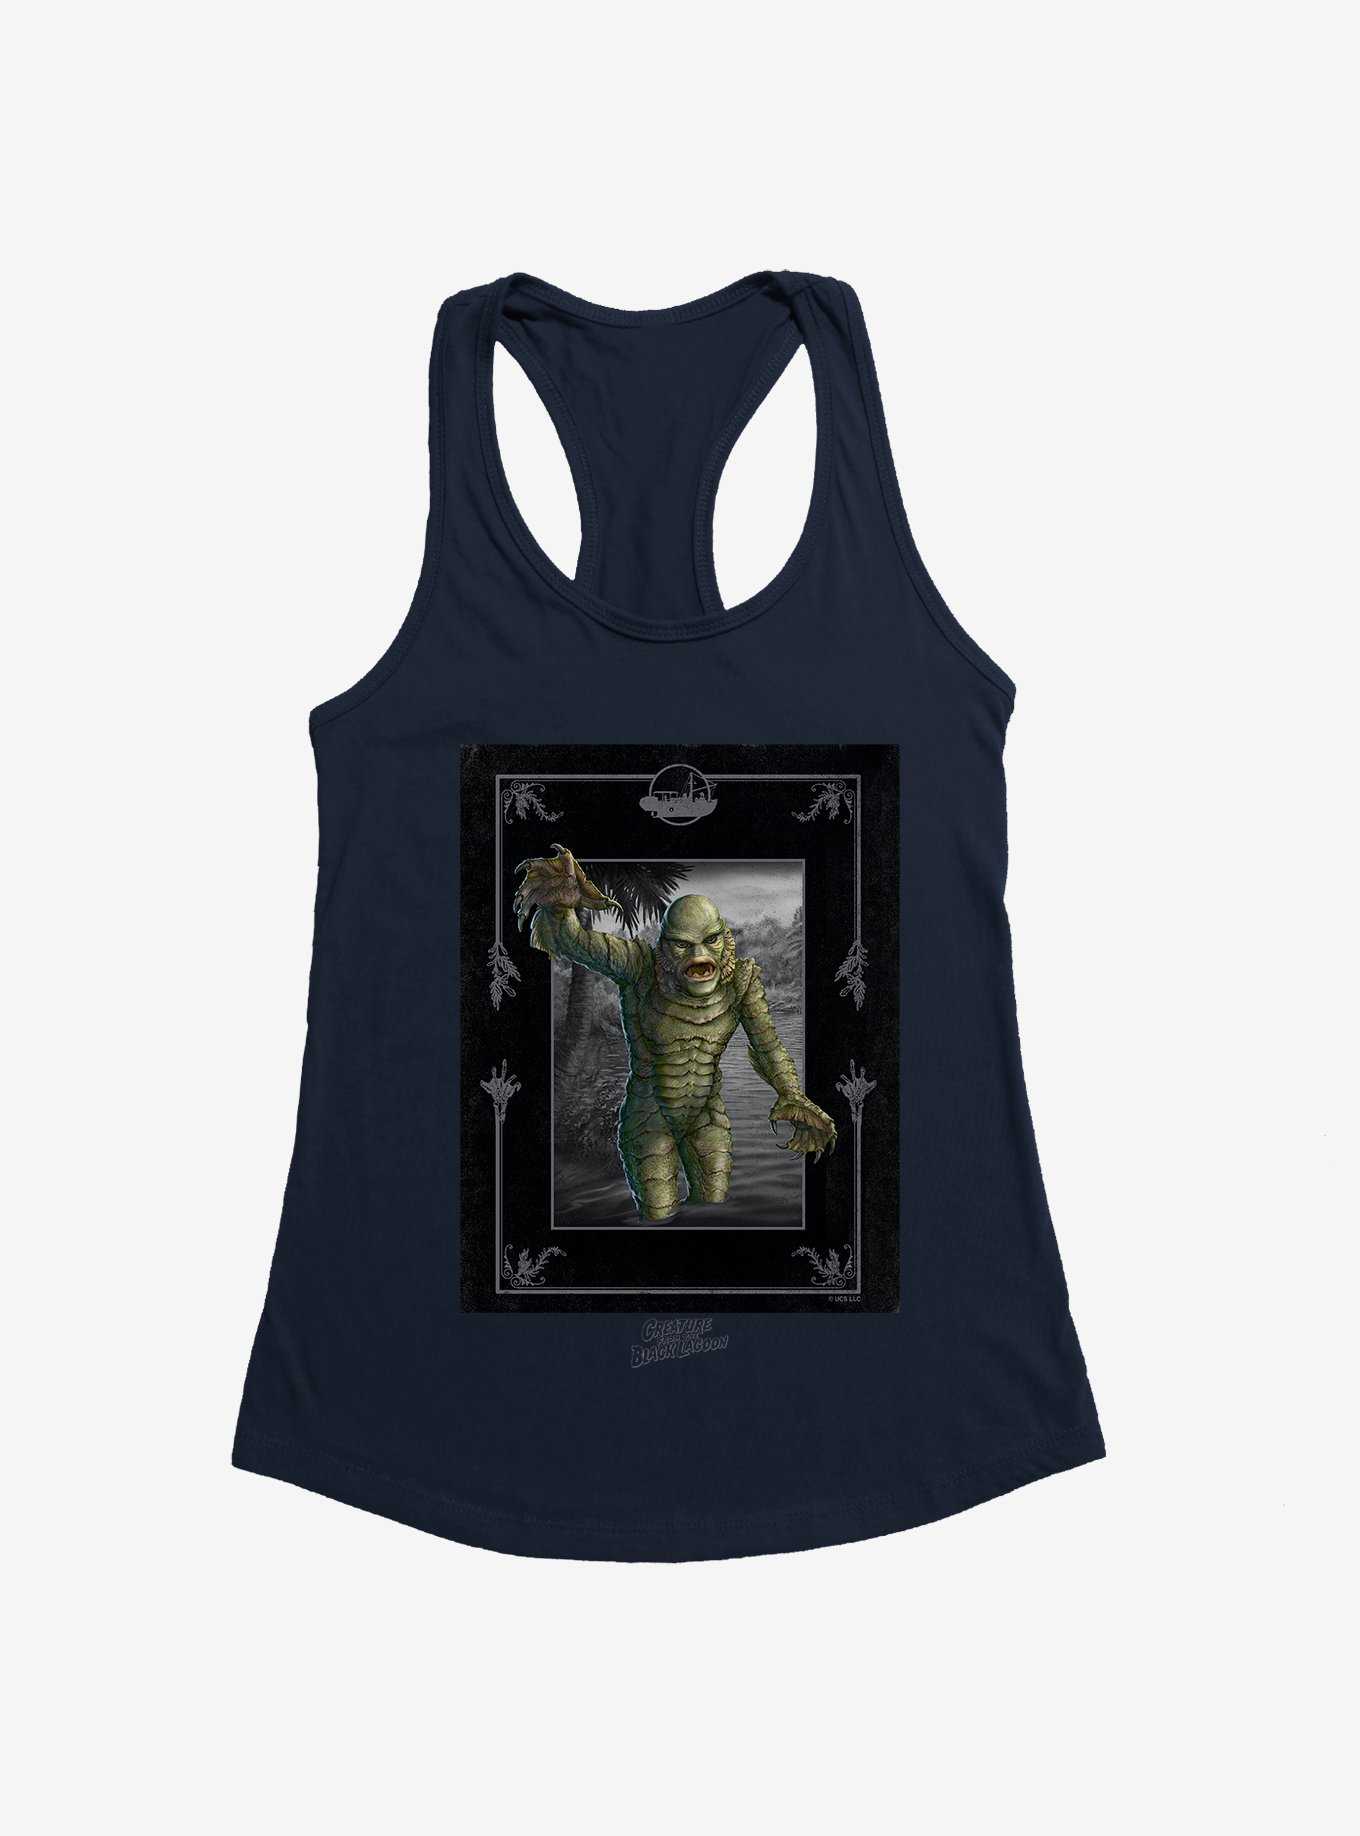 Universal Monsters Creature From The Black Lagoon Out The Water Girls Tank, NAVY, hi-res